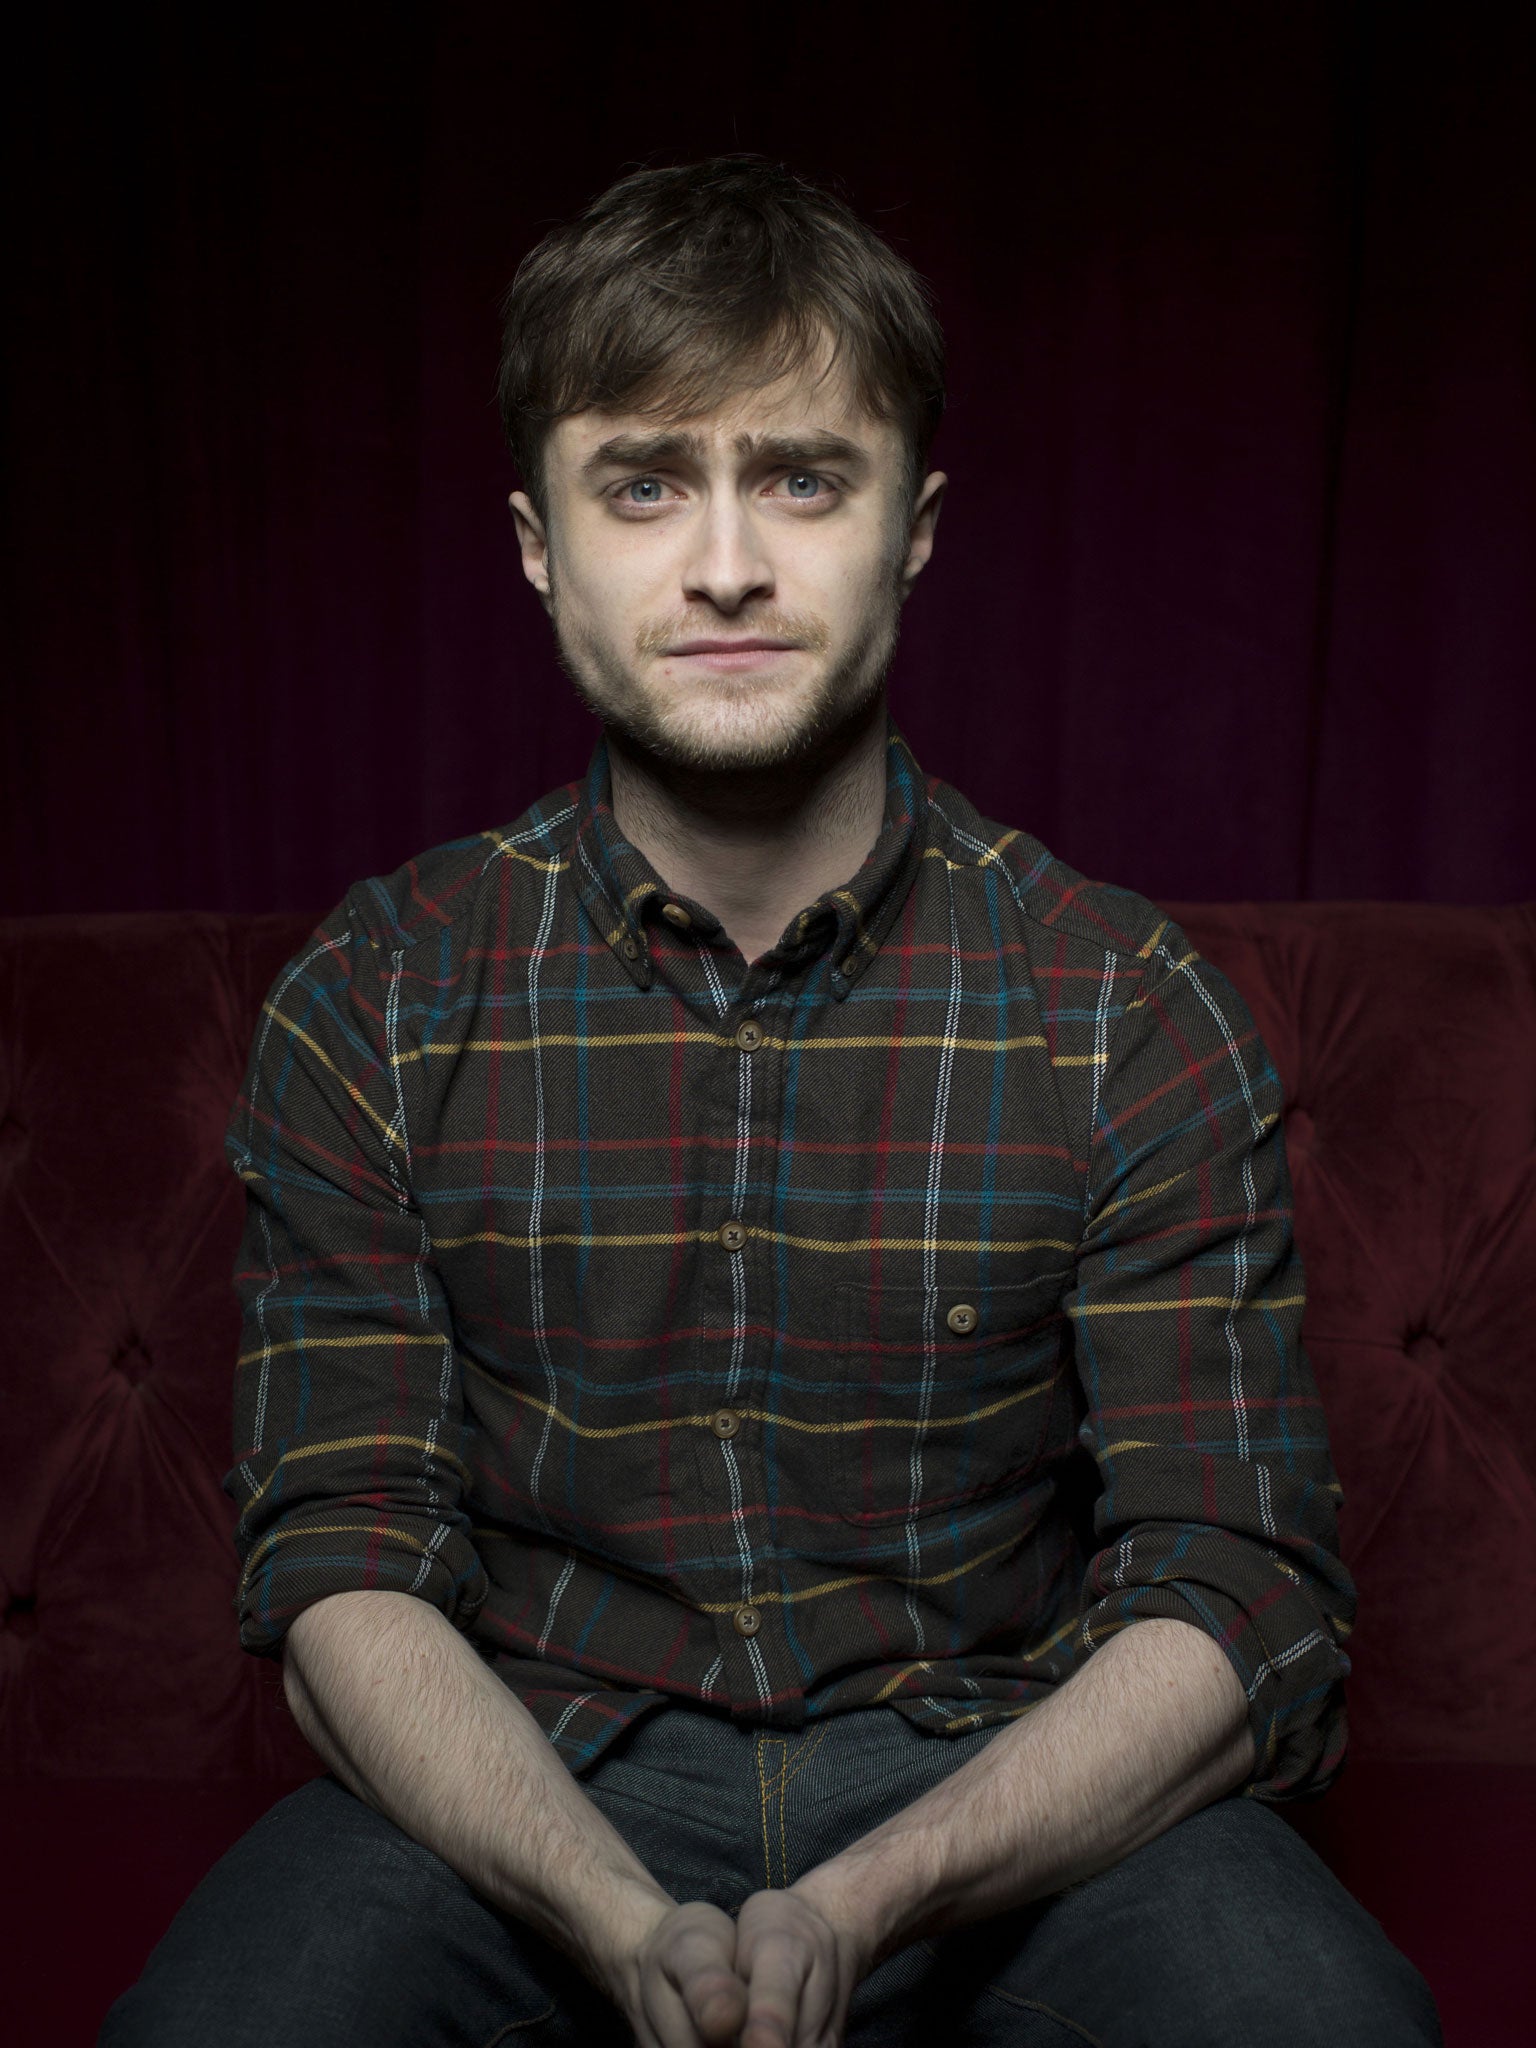 Daniel Radcliffe has revealed there is something missing in his life